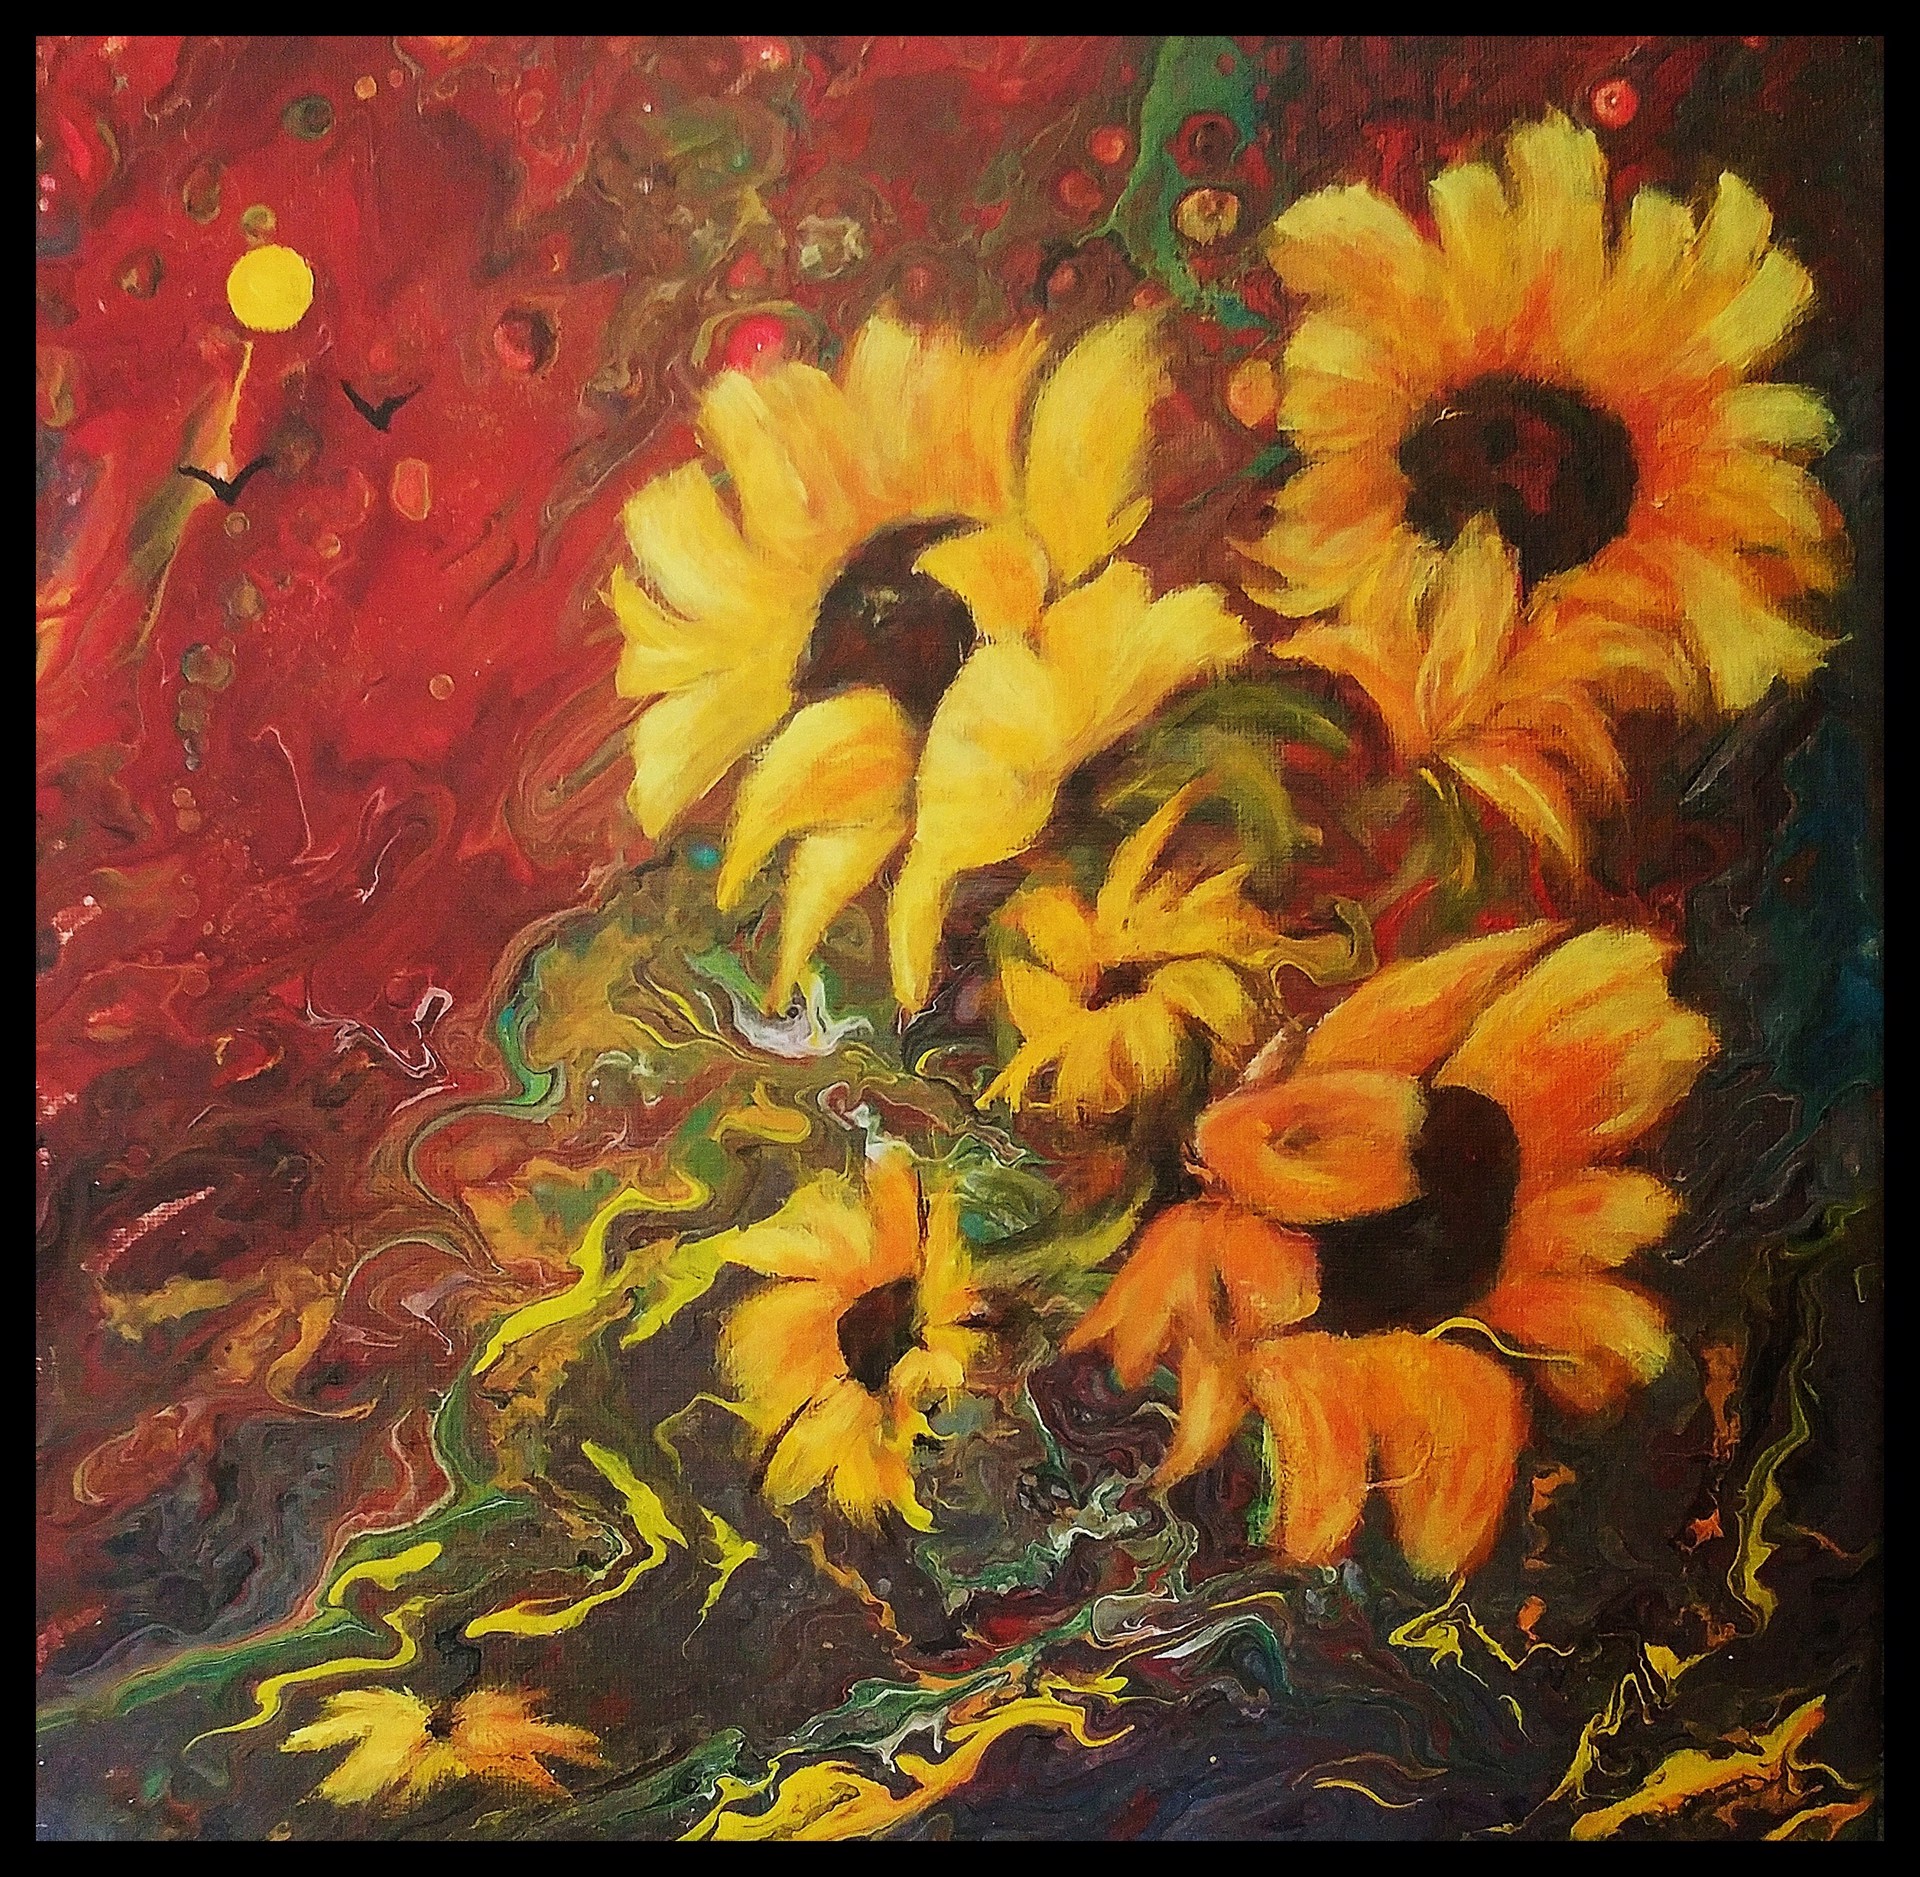 ADVICE FROM A SUNFLOWER by Charleen Martin